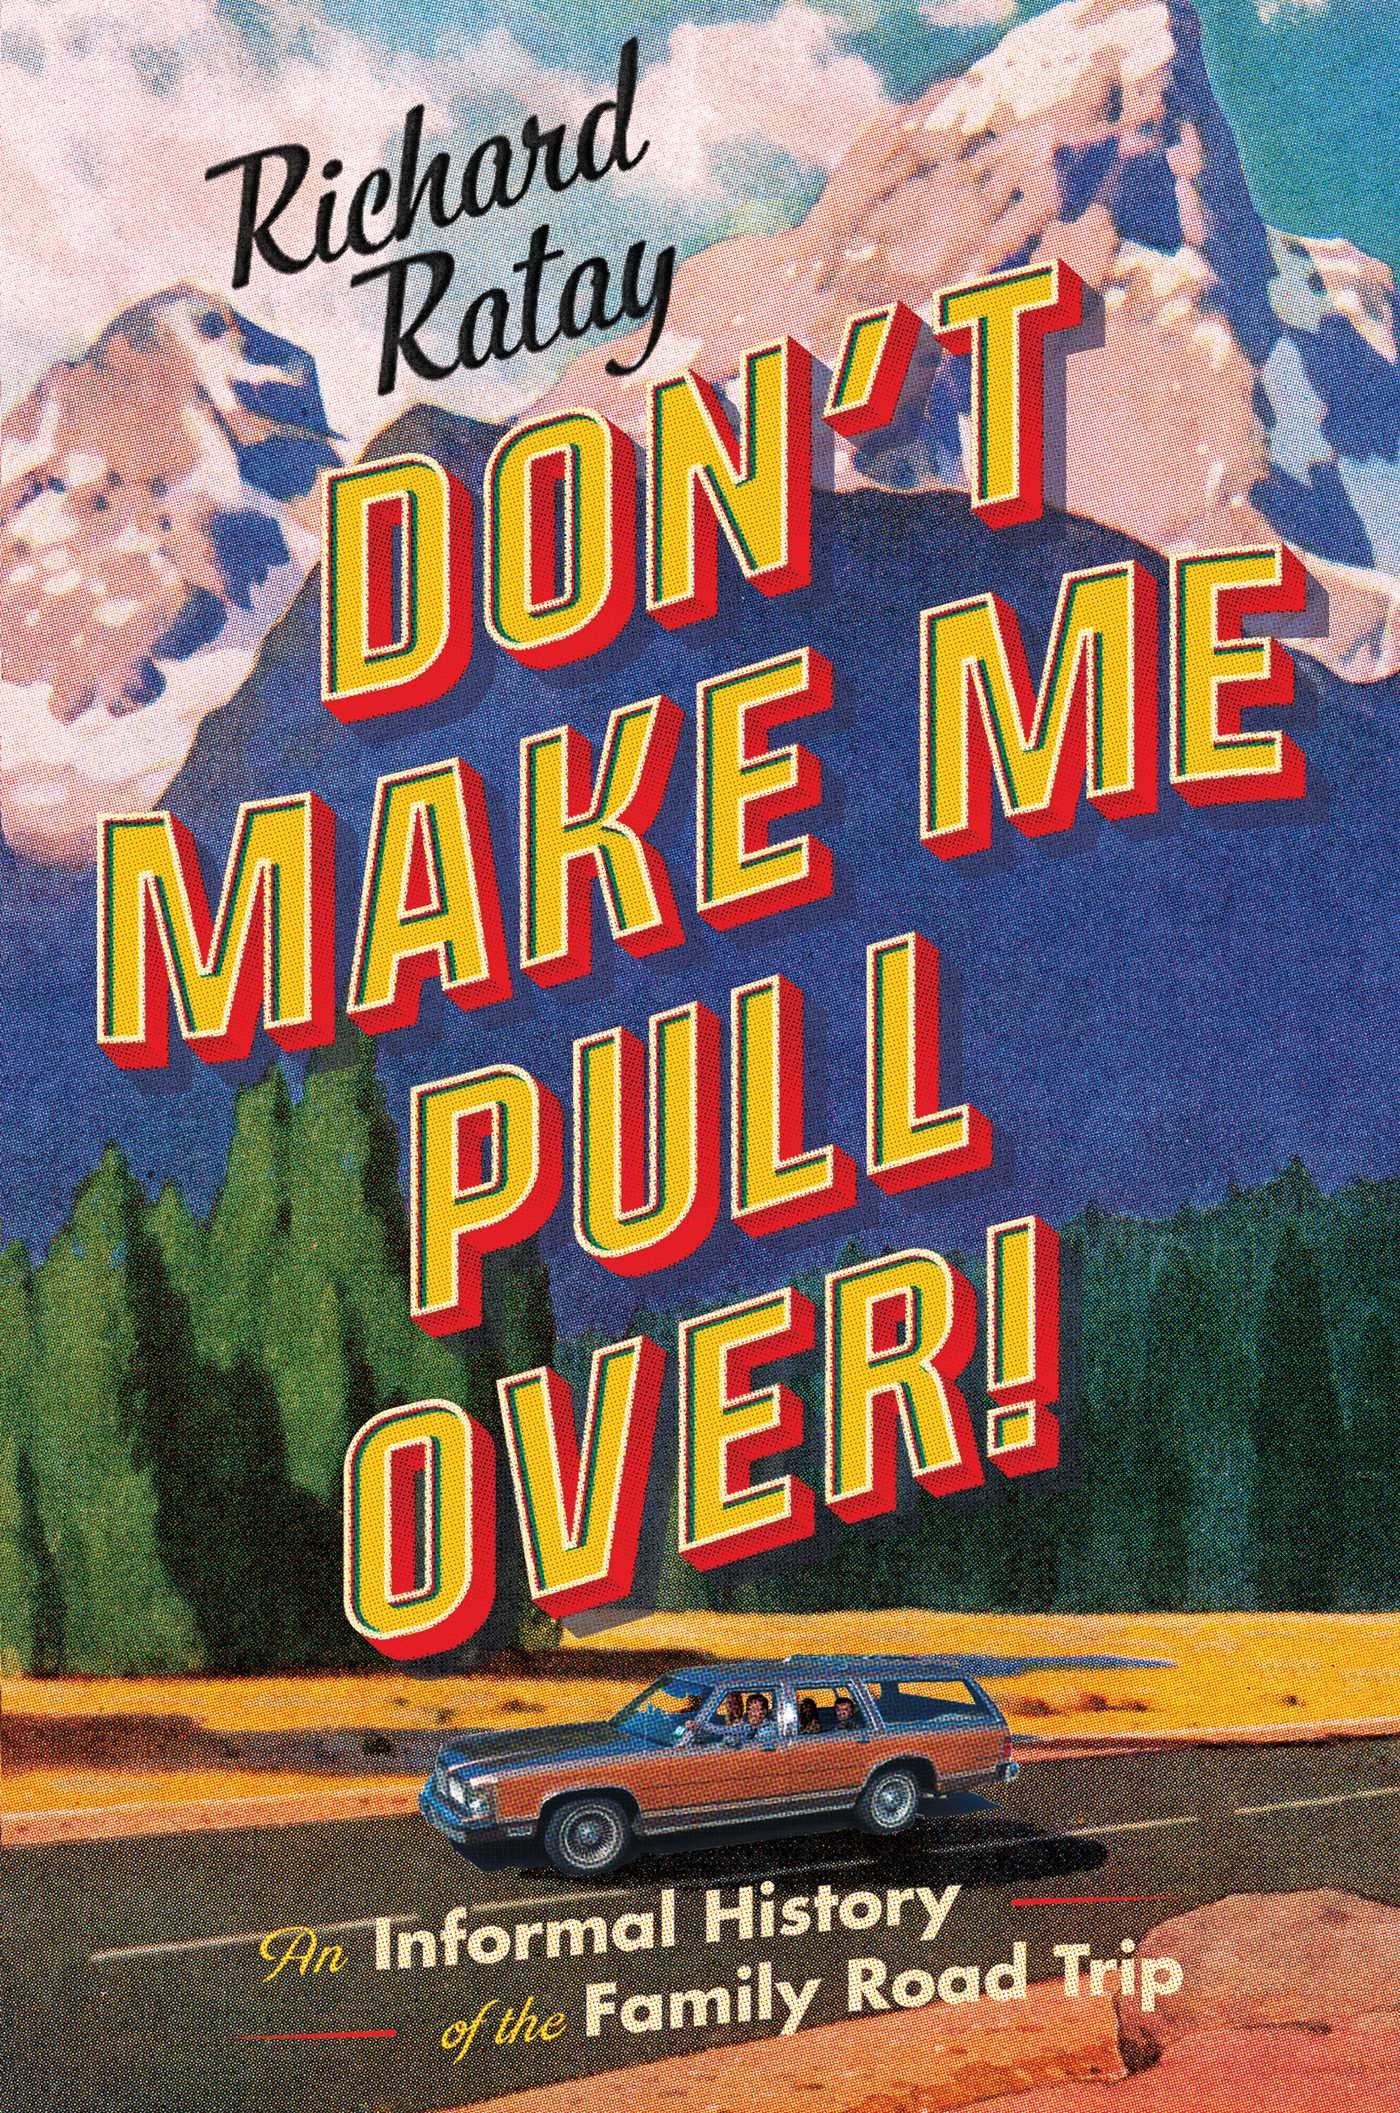 Don't Make Me Pull Over!: An Informal History of the Family Road Trip